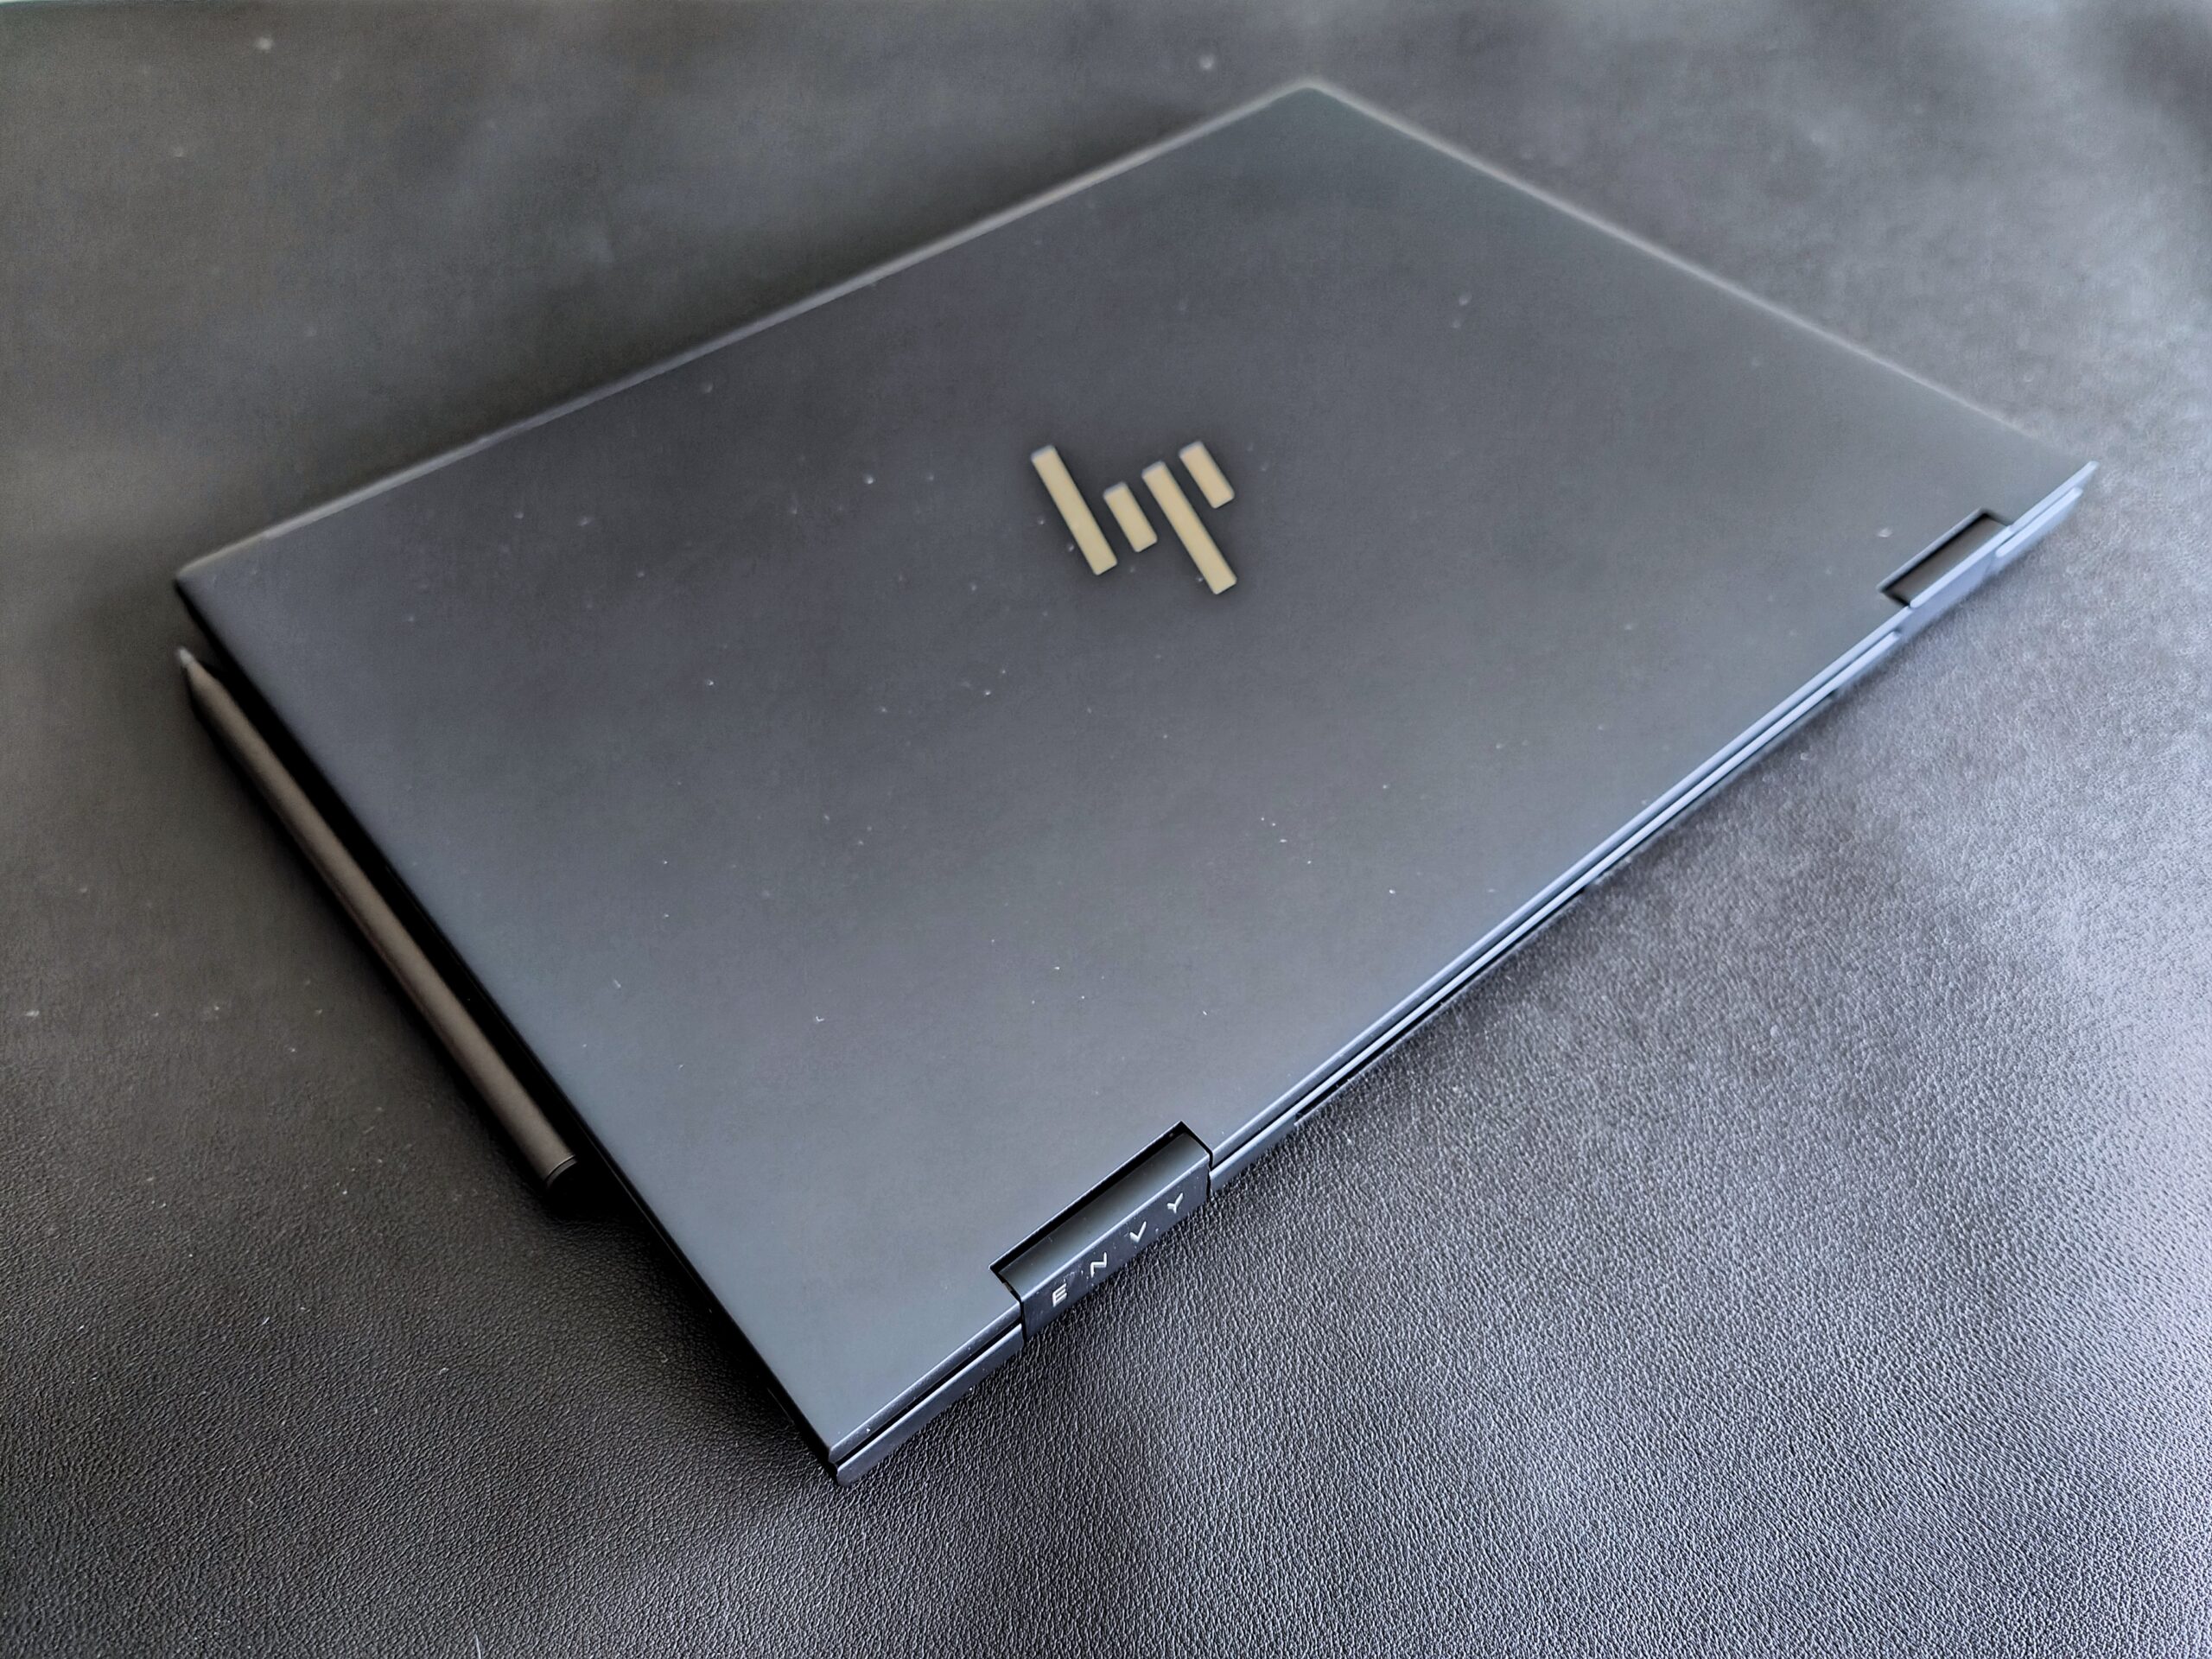 HP Envy x360 13 review: A portable and powerful student laptop